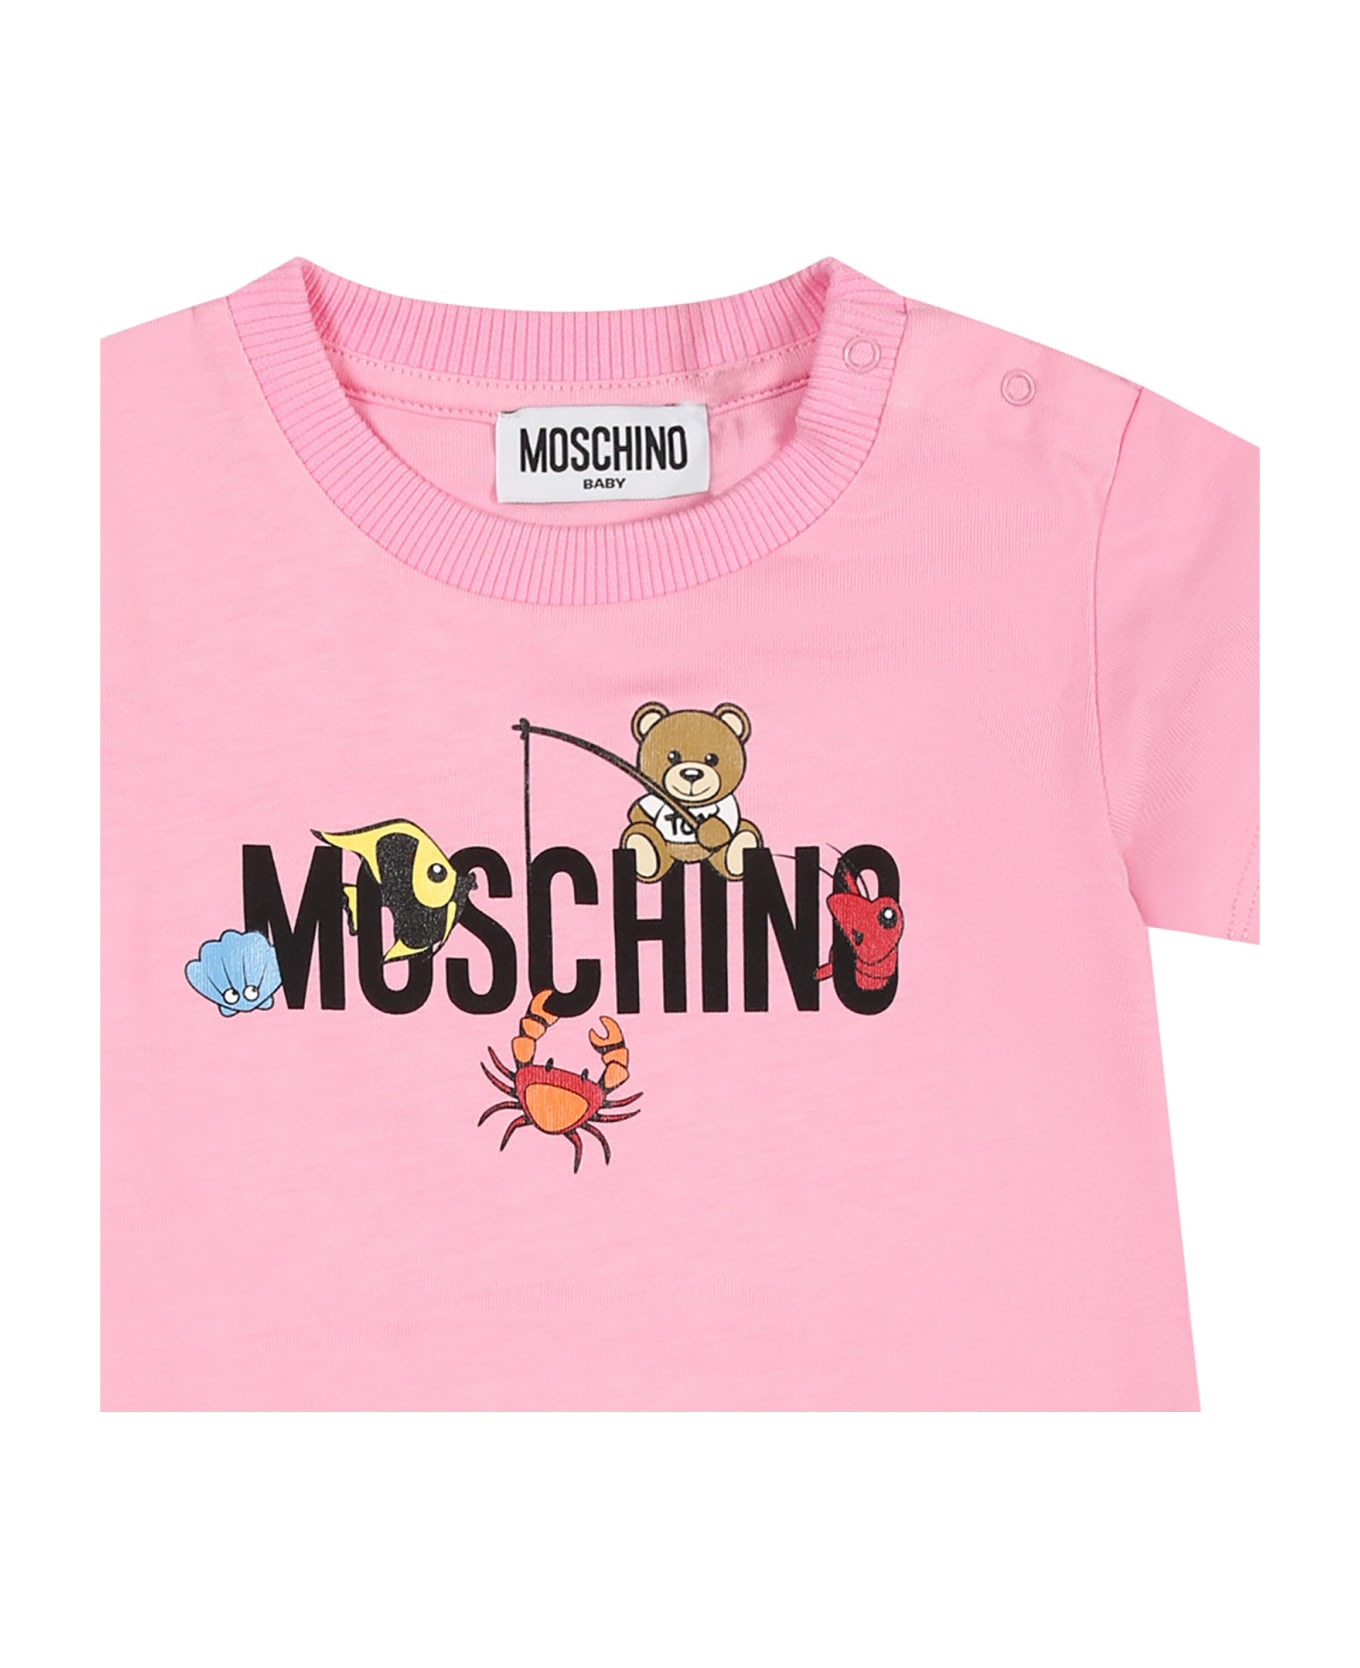 Moschino Pink Dress For Baby Girl With Logo And Animals - Pink ウェア